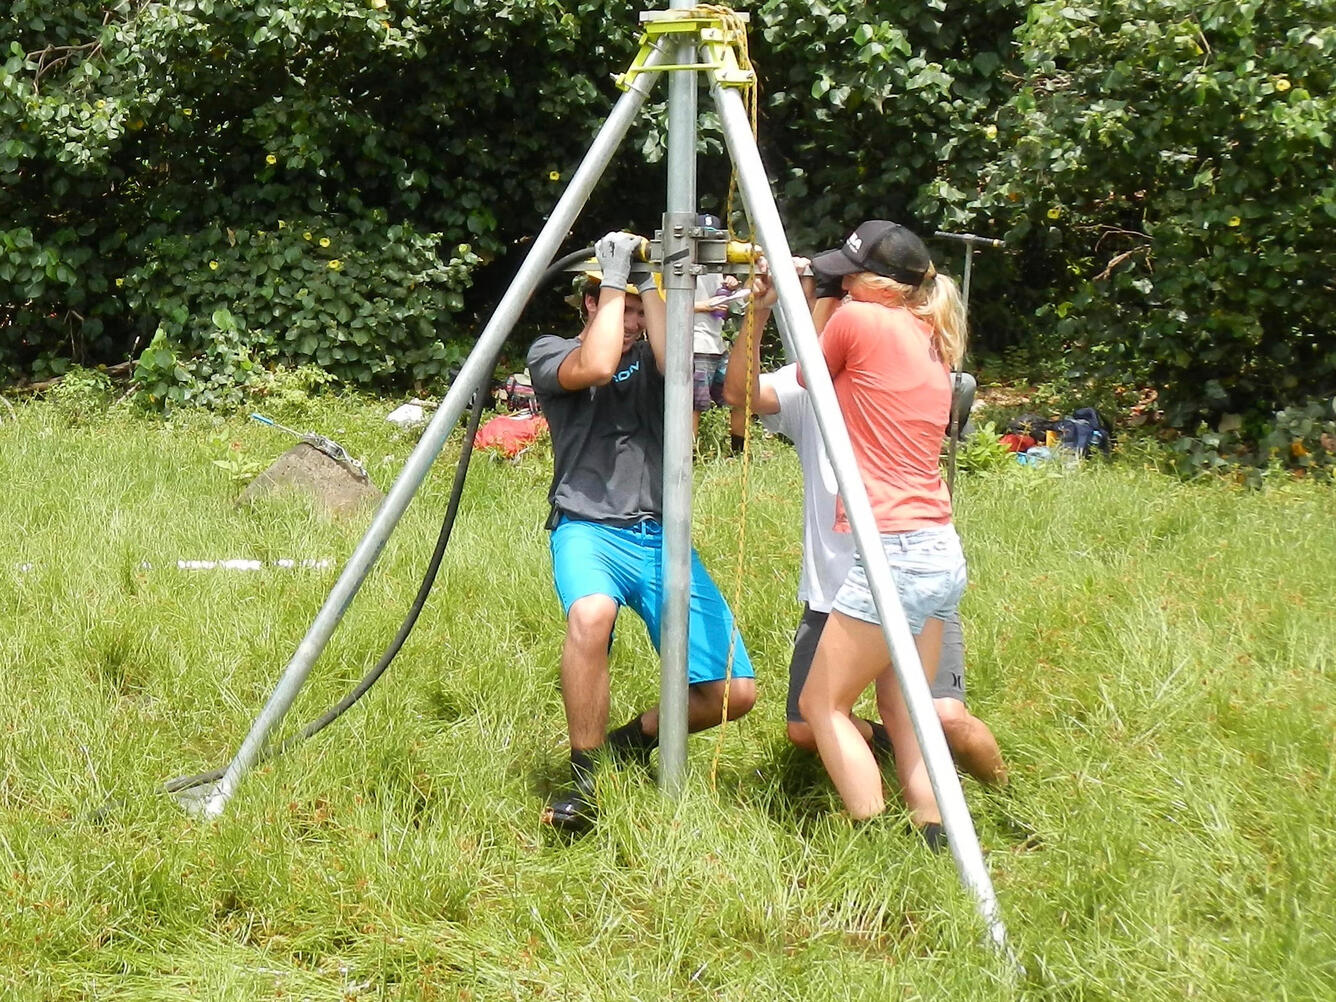 Three people pull hard on handles on a coring device stabilized by a tripod frame, to push and twist it into a grassy marsh.